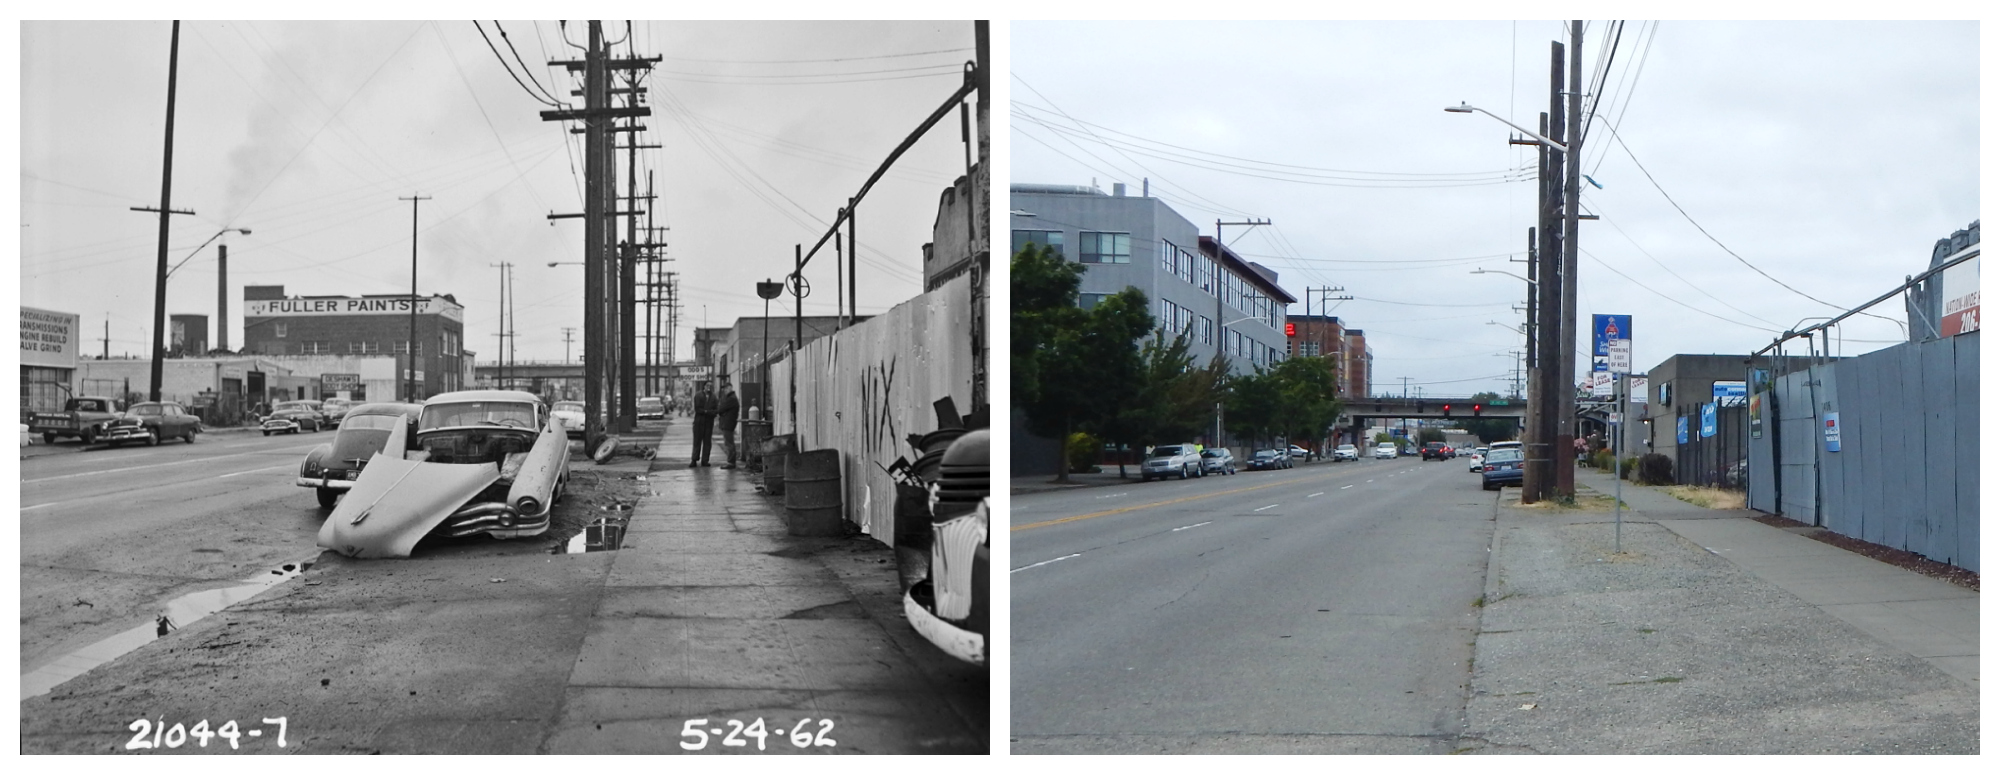 14th Ave NW and Leary - 1962 and 2016